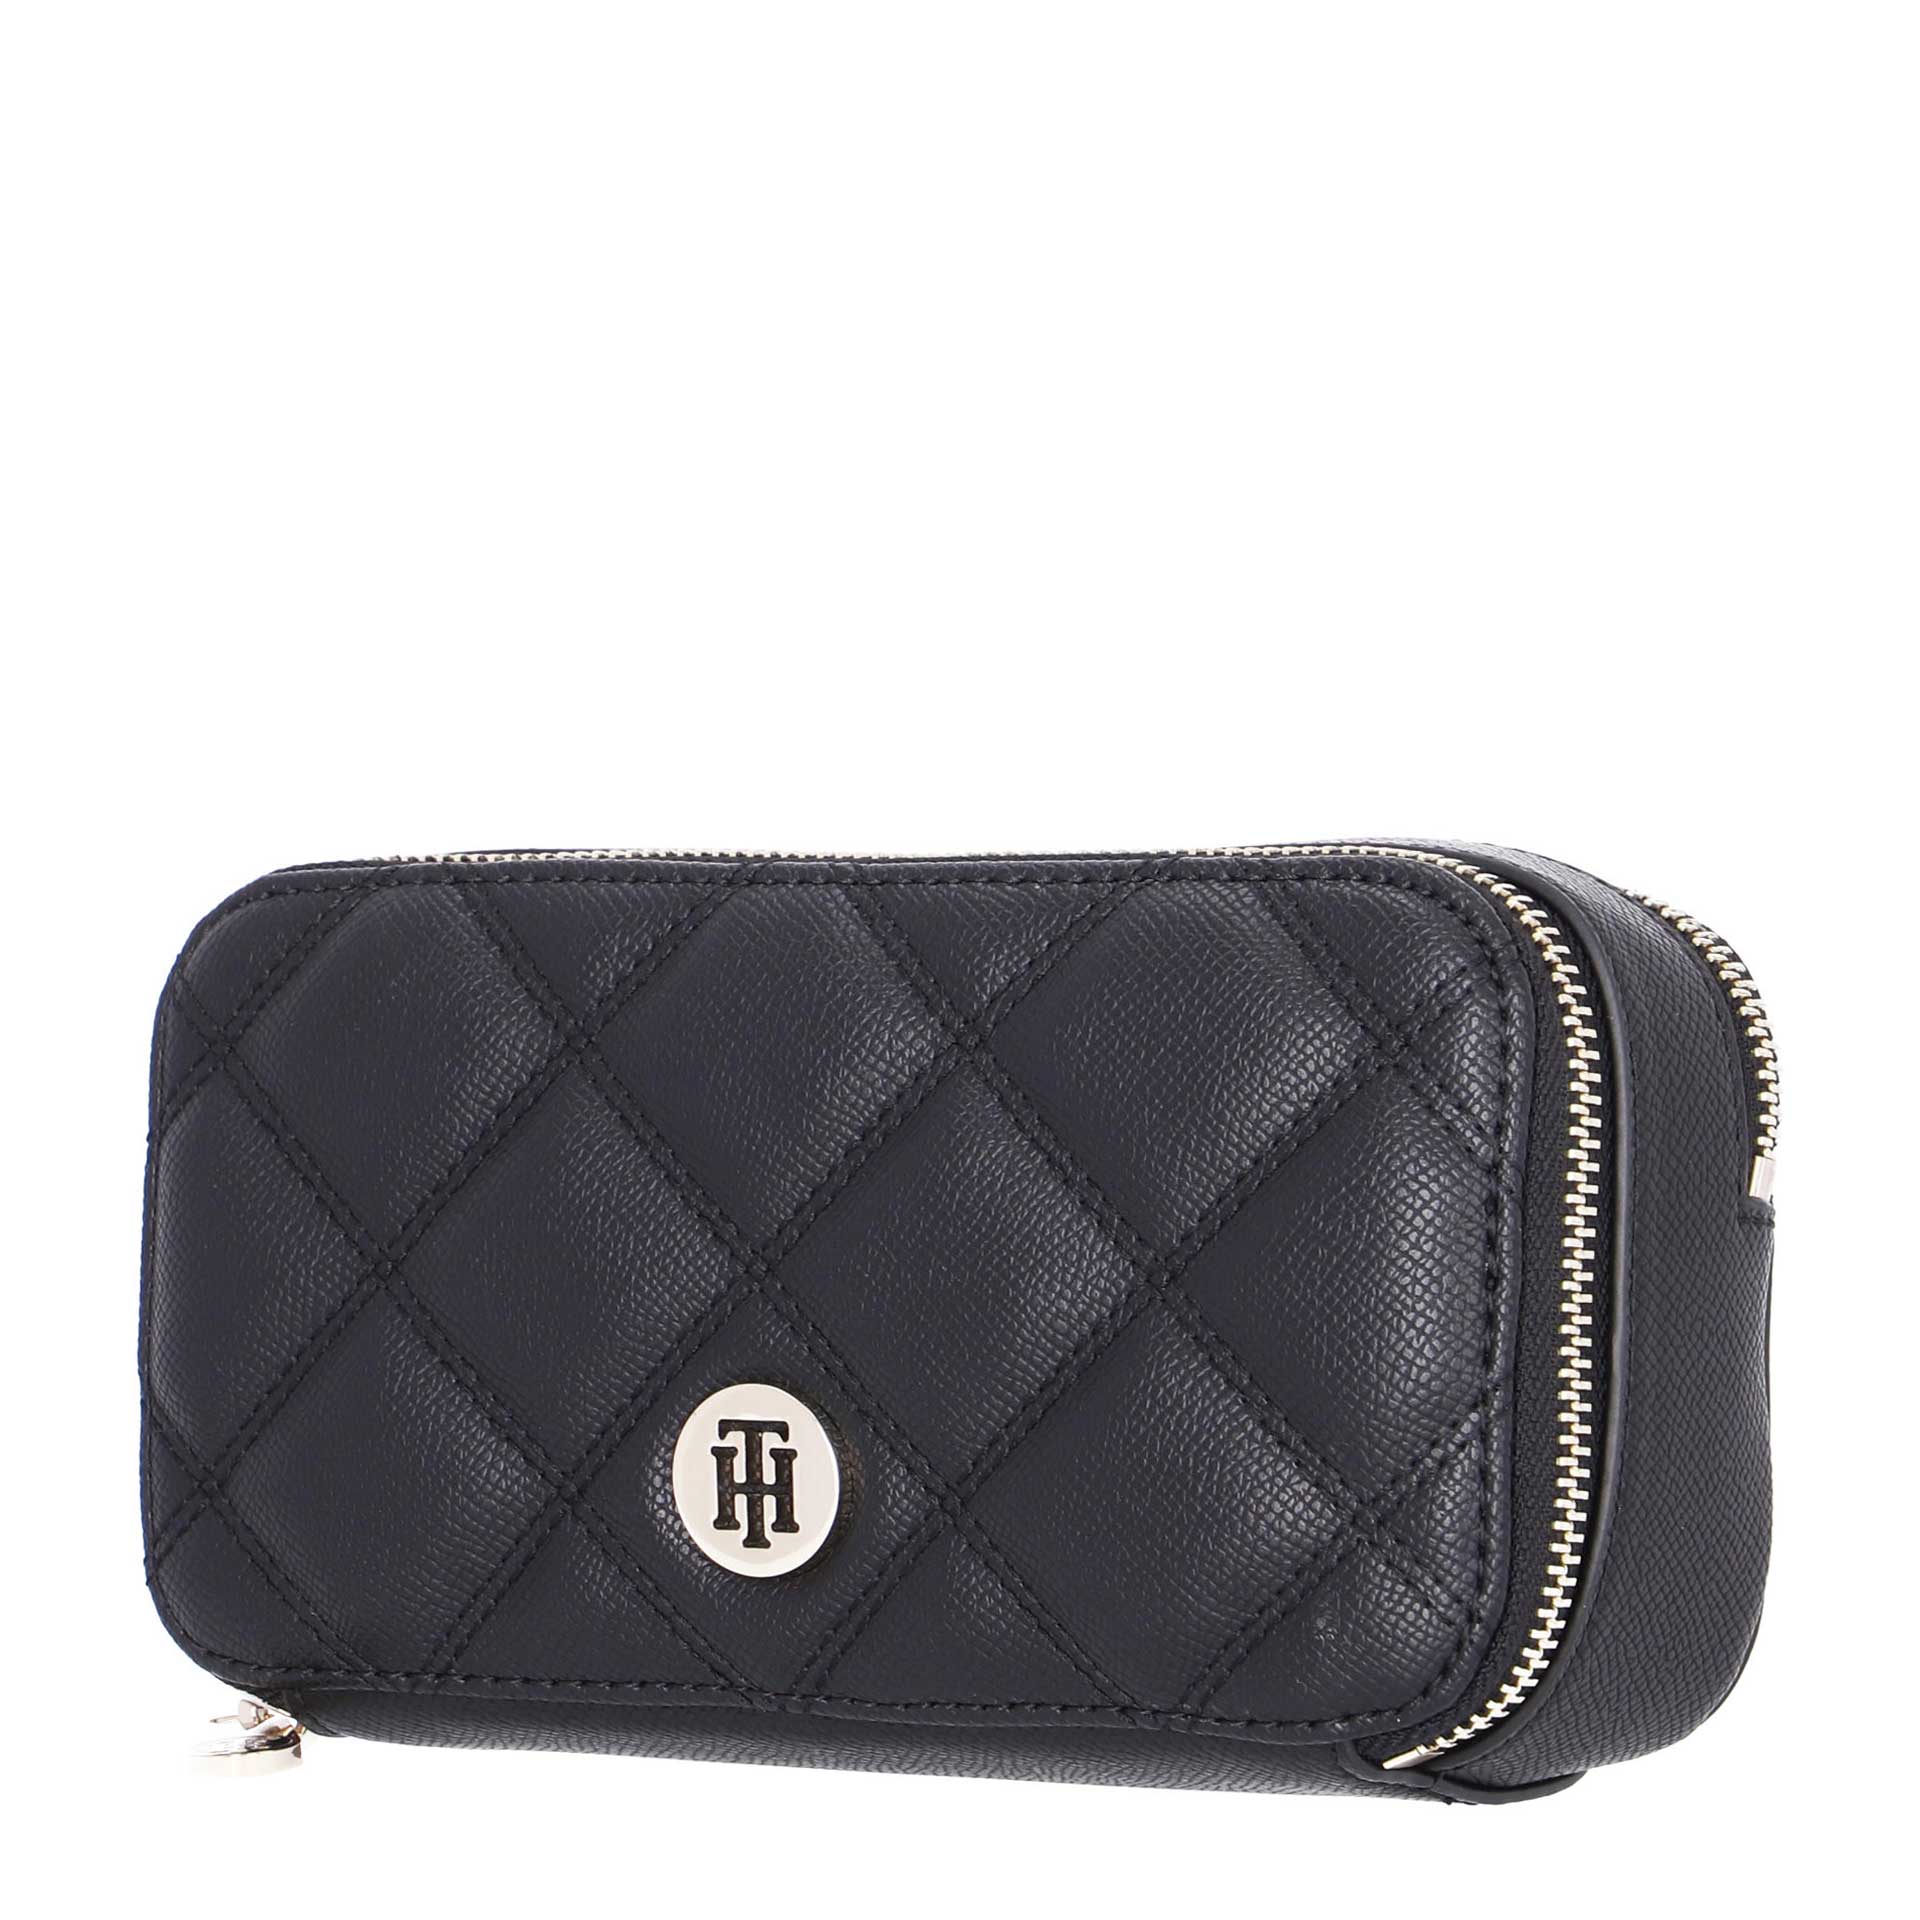 Tommy Hilfiger Honey Wallet on a chain black